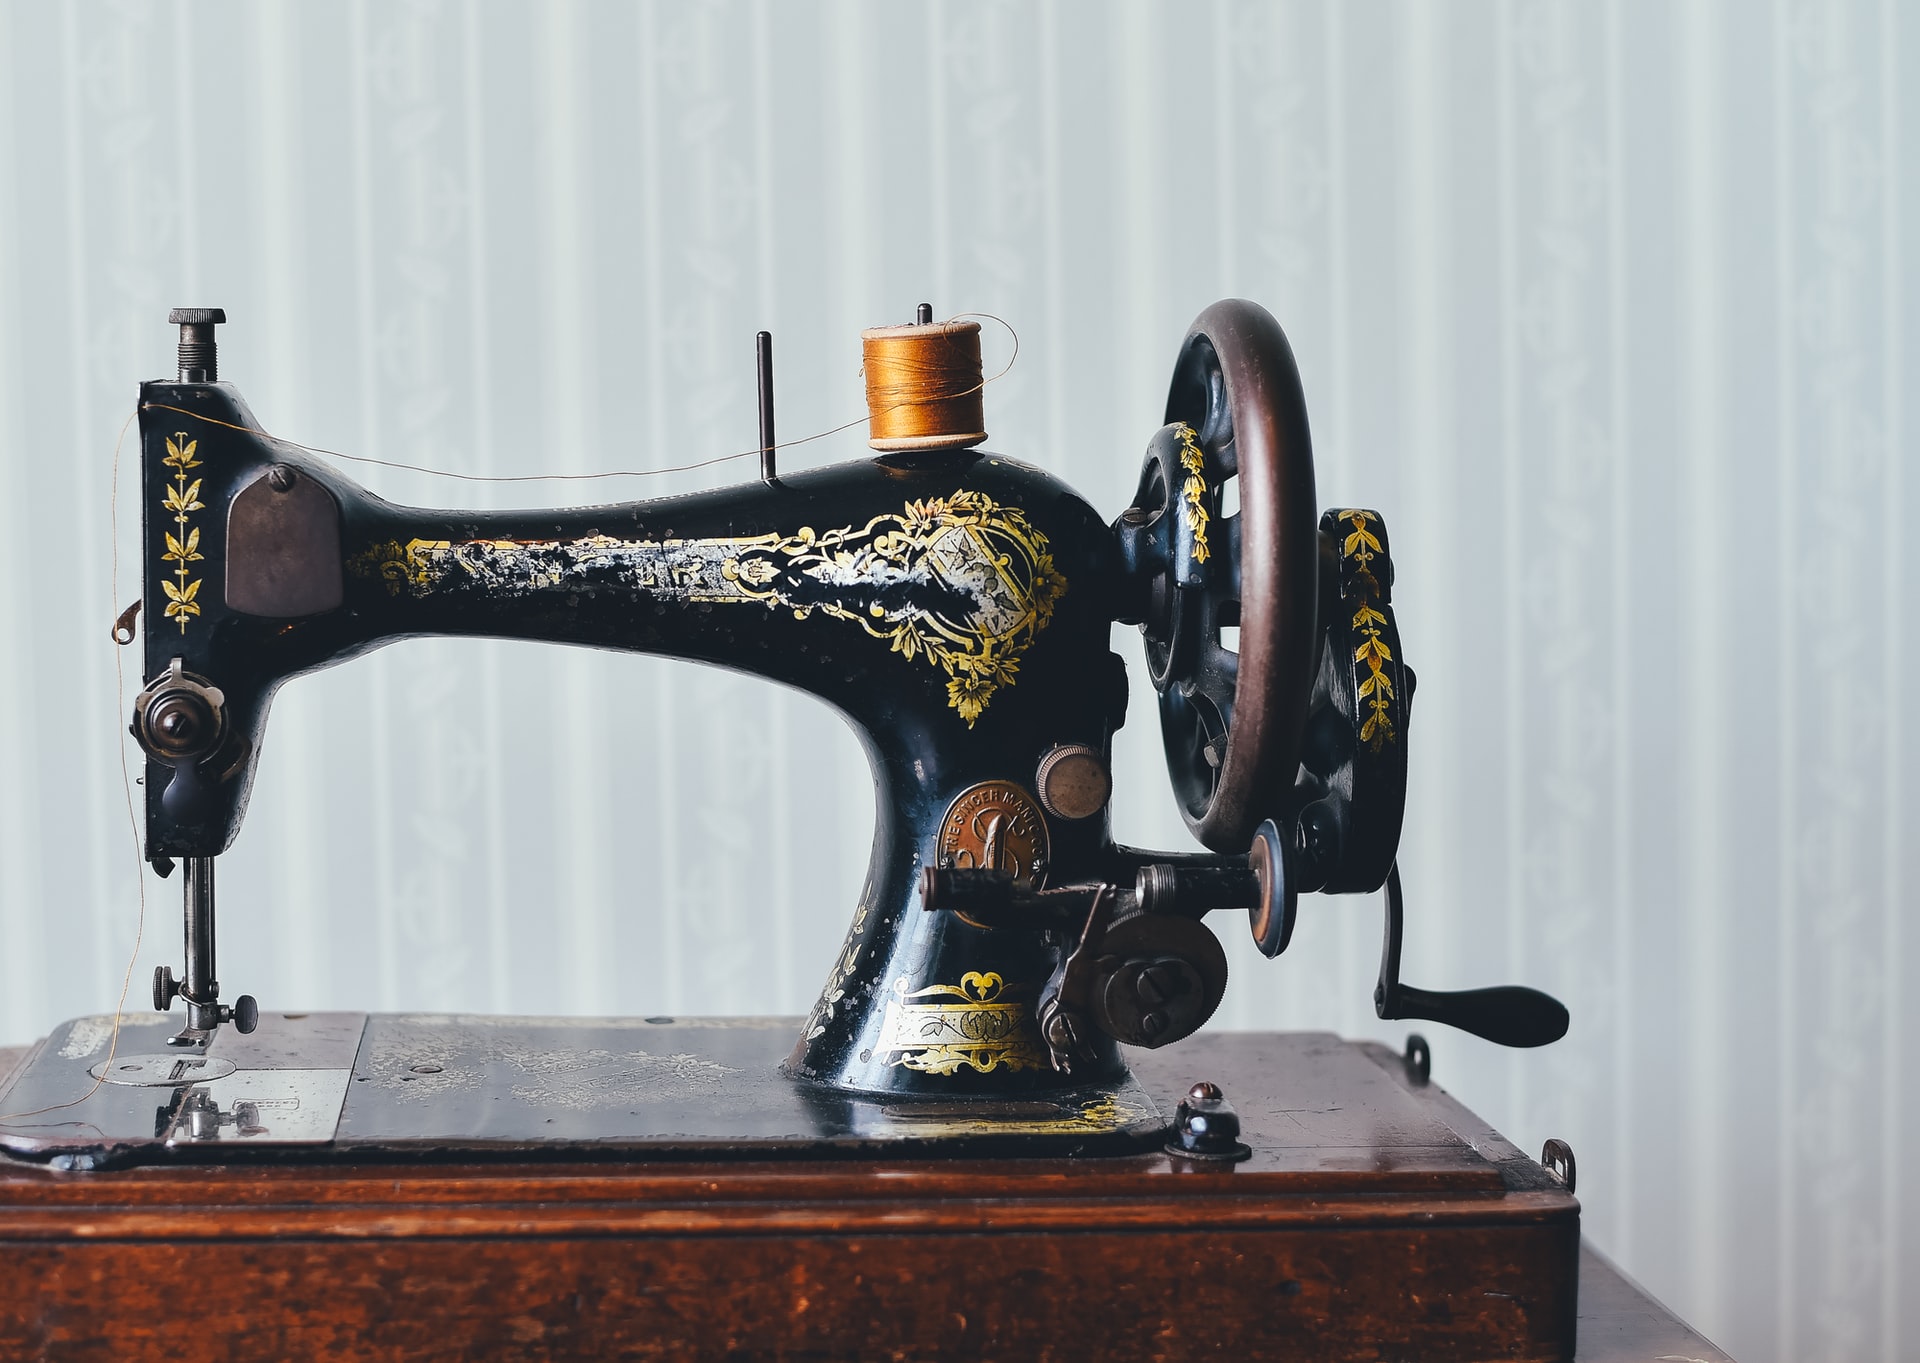 How to use an old sewing machine?